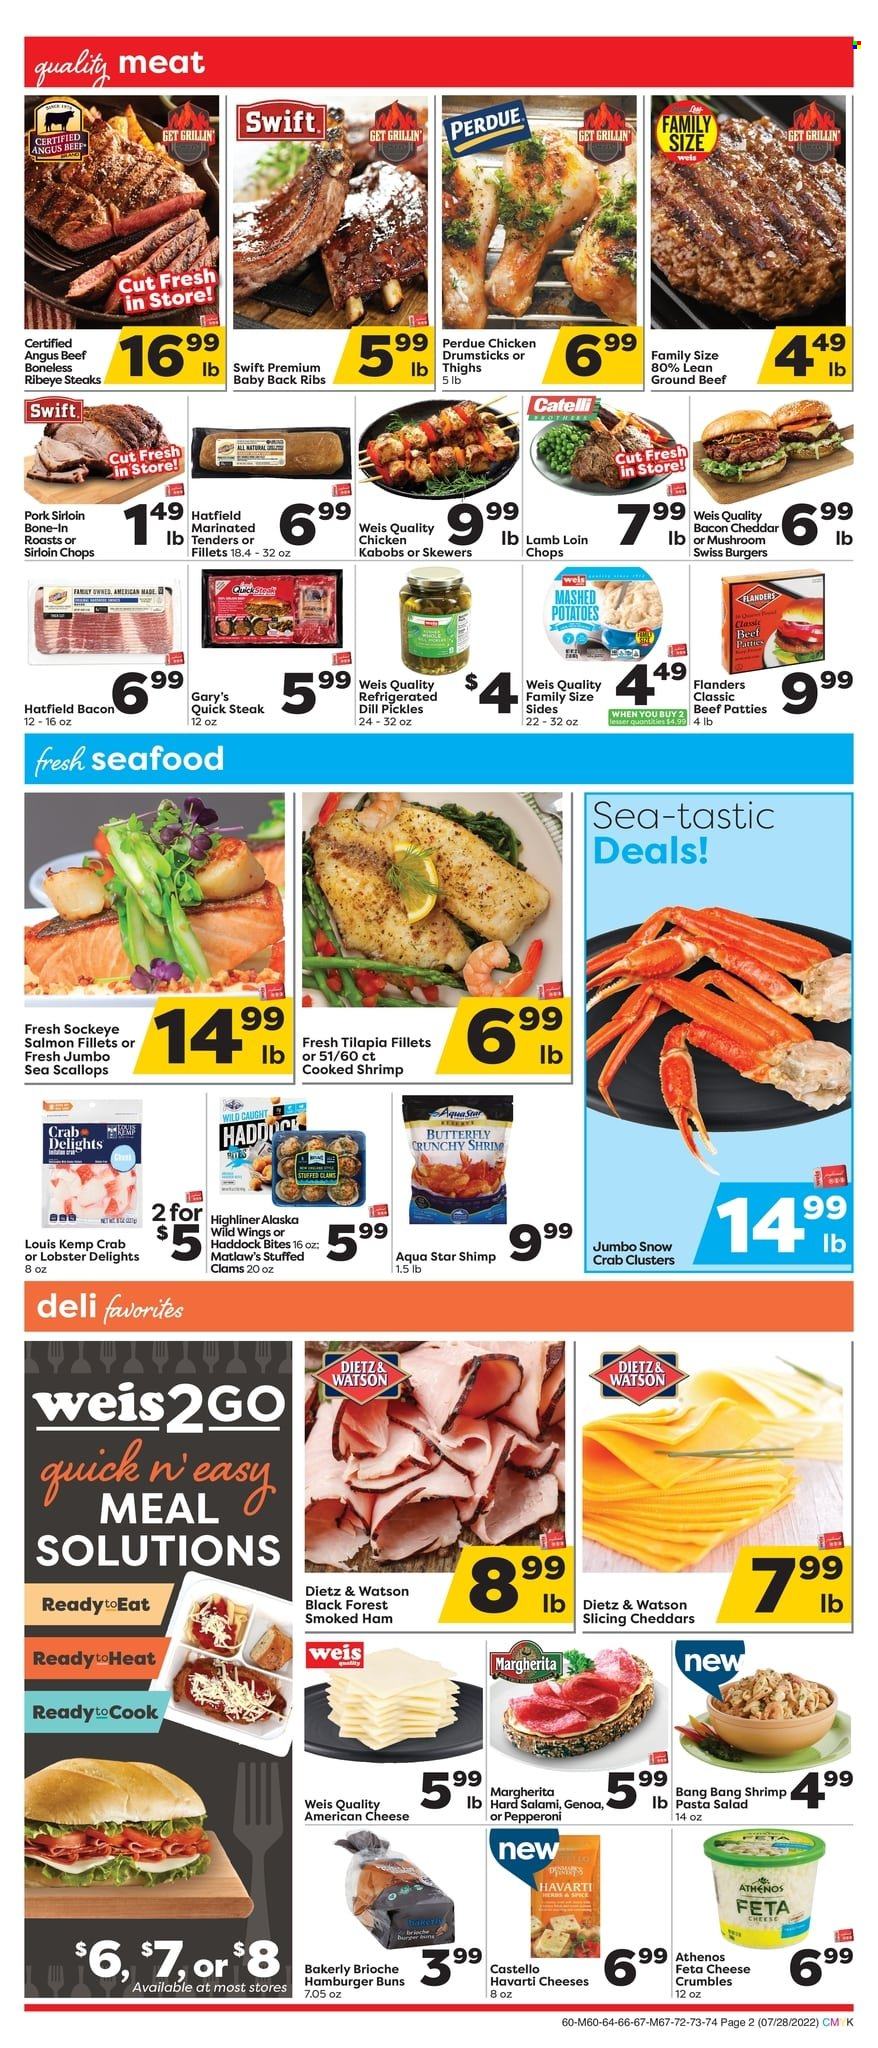 thumbnail - Weis Flyer - 07/28/2022 - 08/24/2022 - Sales products - buns, burger buns, brioche, chicken drumsticks, Perdue®, beef meat, ground beef, steak, ribeye steak, pork loin, pork meat, pork ribs, pork back ribs, lamb loin, lamb meat, clams, lobster, salmon, salmon fillet, scallops, tilapia, haddock, seafood, crab, shrimps, mashed potatoes, bacon, salami, ham, smoked ham, Dietz & Watson, pepperoni, american cheese, Havarti, cheddar, cheese, feta, cheese crumbles, pickles, Tastic, dill, spice. Page 2.